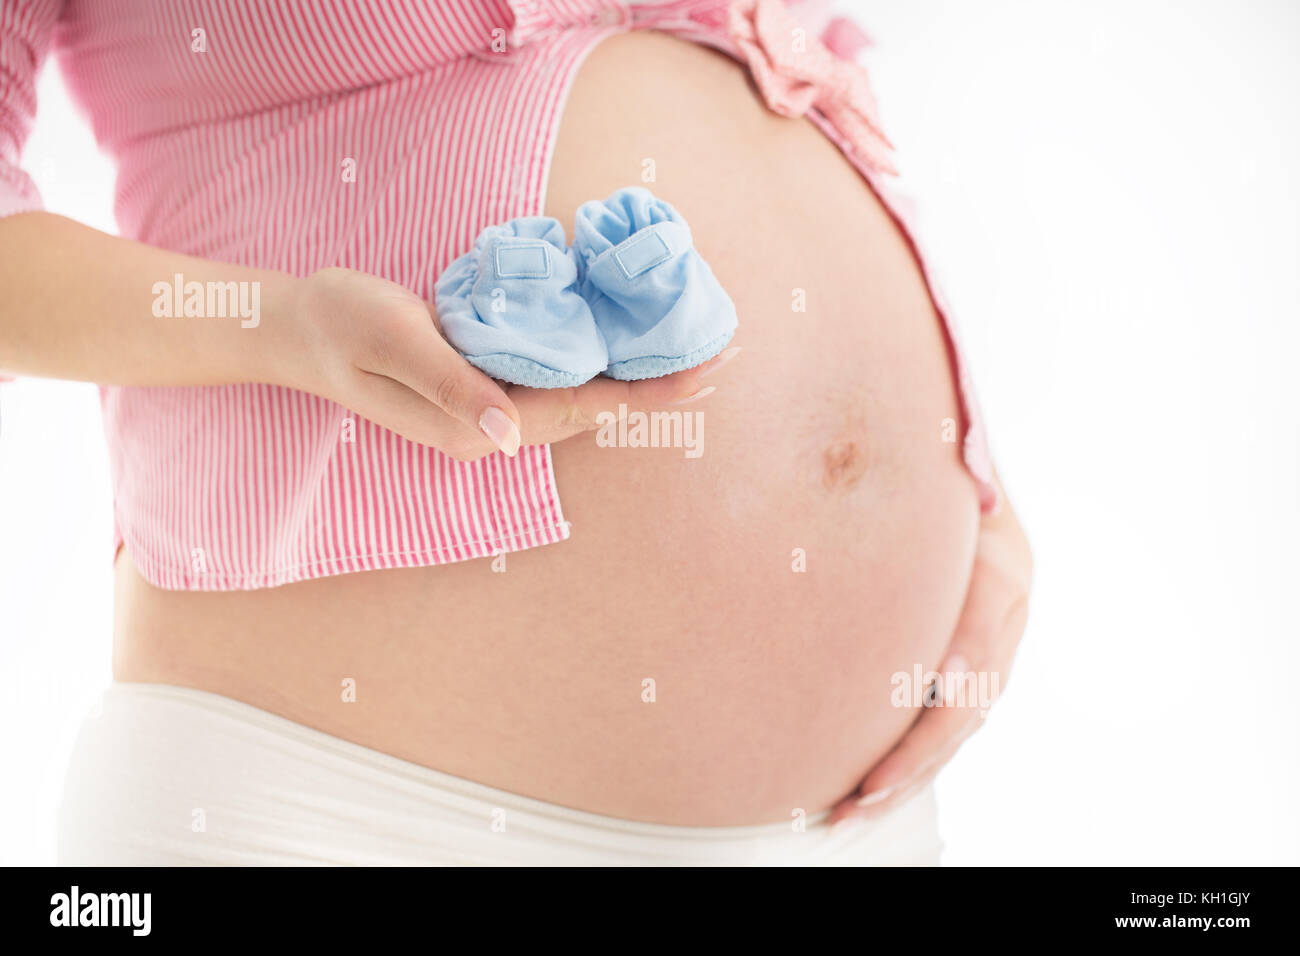 Small shoes for the unborn baby in the belly of pregnant woman Stock Photo